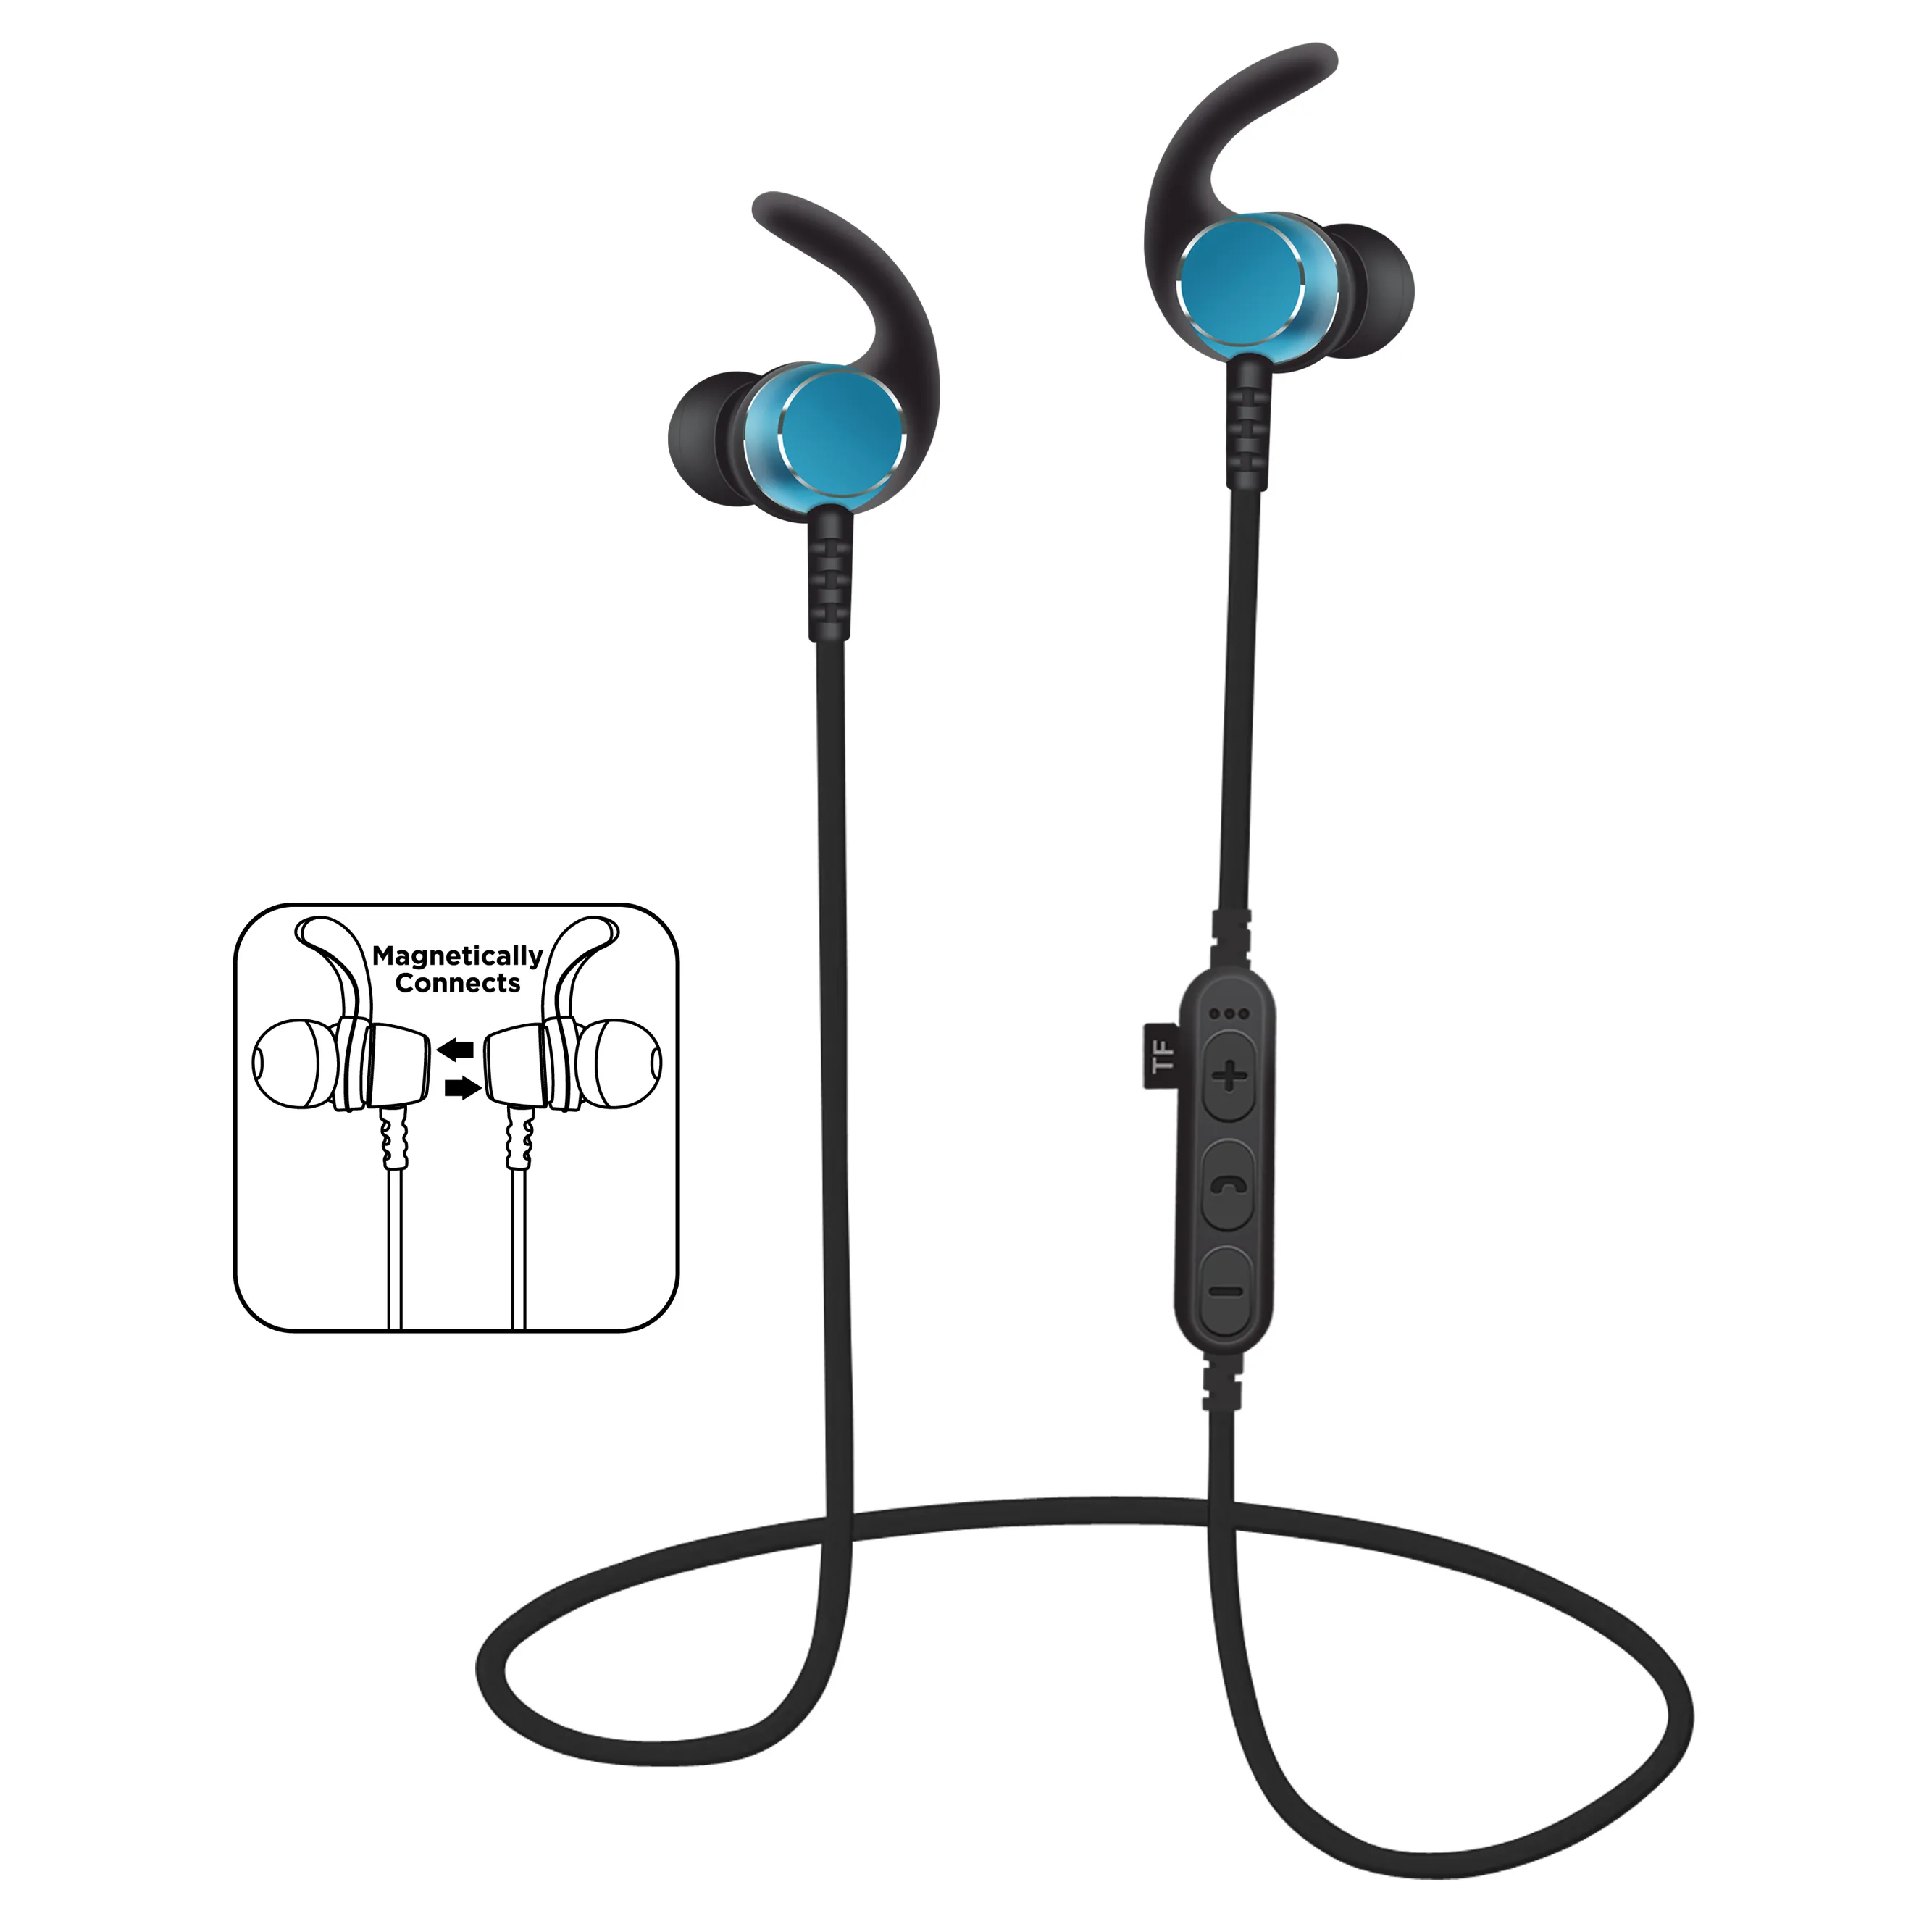 MS-T3 Magnetic sport Wireless Bluetooth headset earphones earbuds BT 4.2 headphones With Mic MP3 Stereo For smart phone